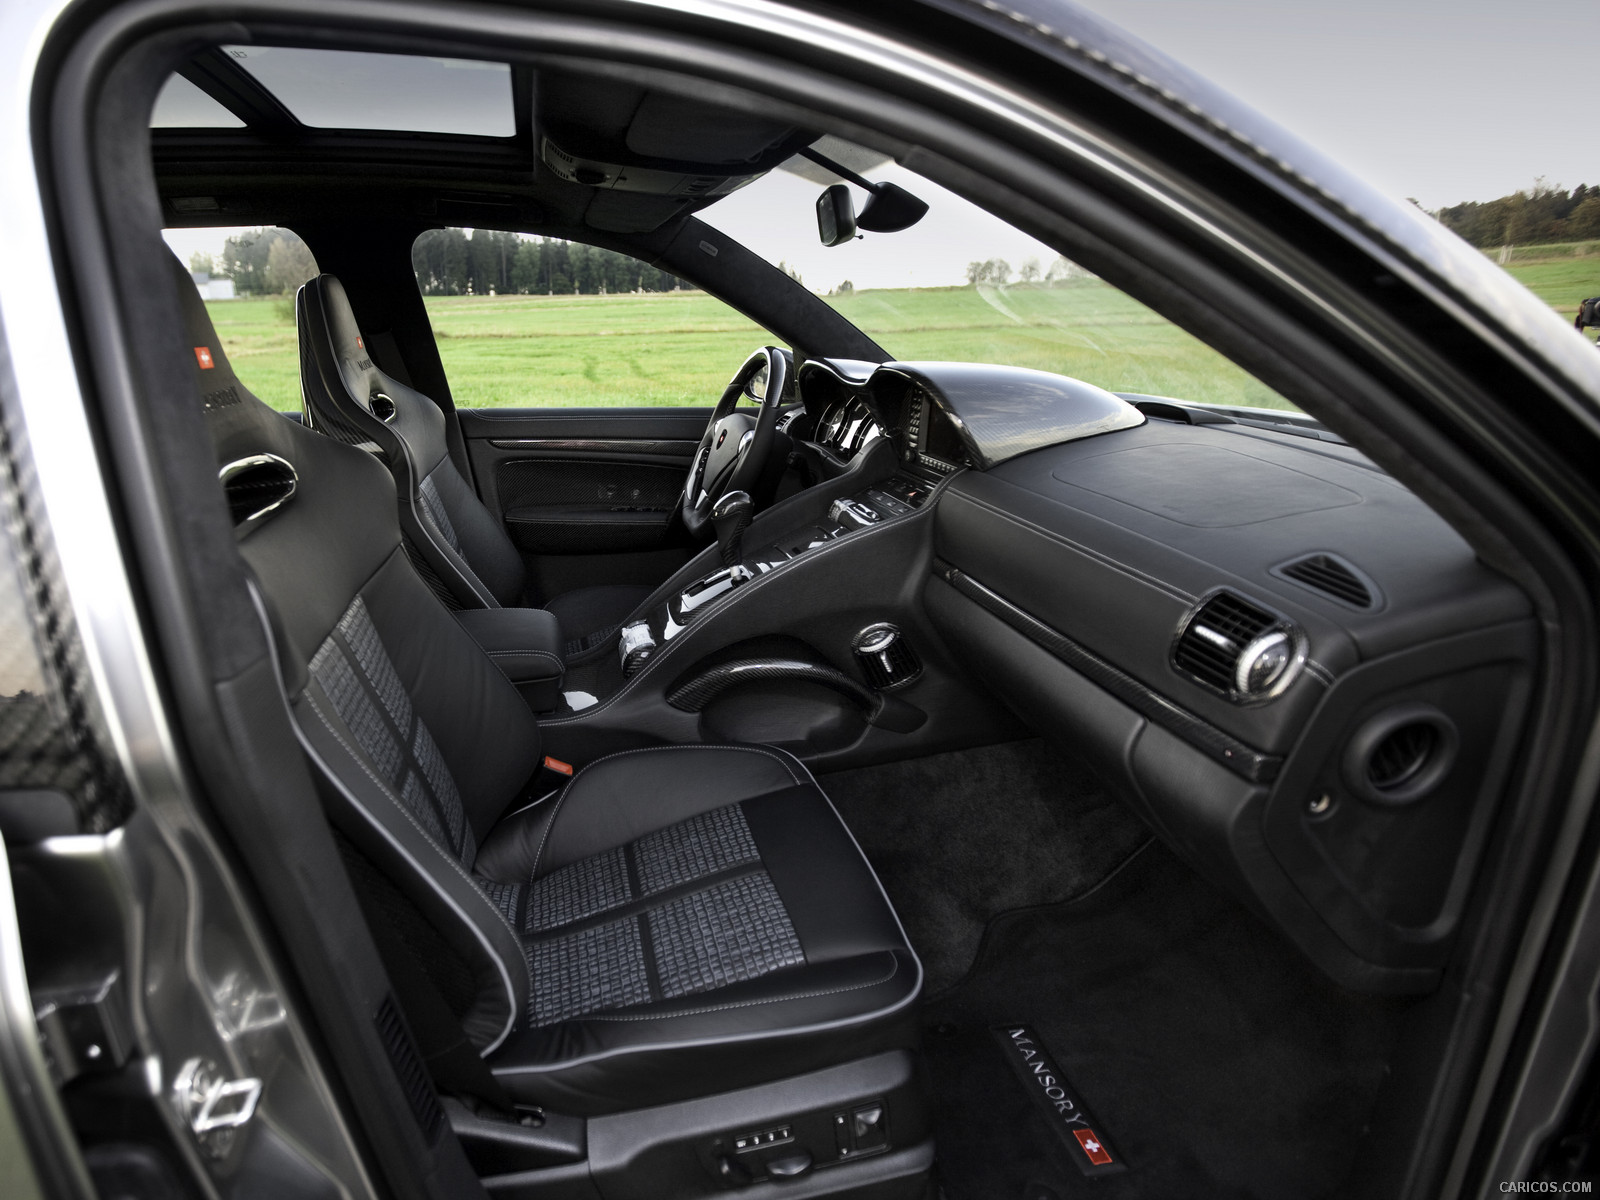 2009 Mansory Chopster based on Porsche Cayenne Turbo S  - Interior, #28 of 38